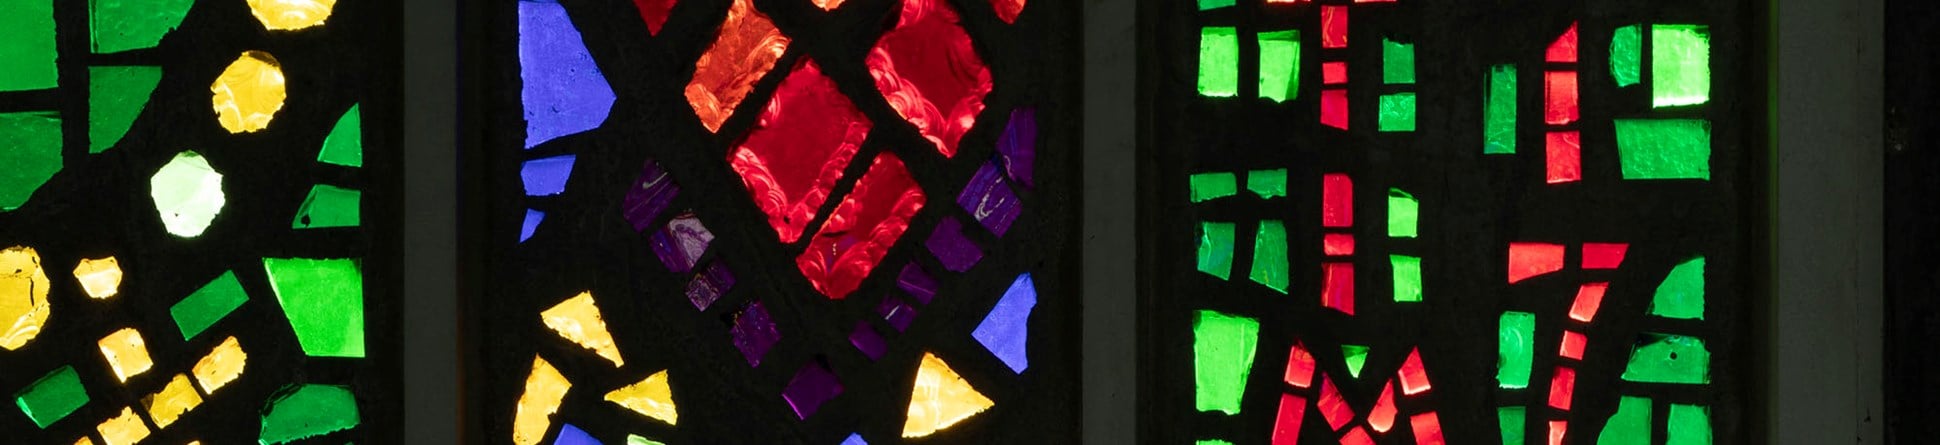 The photo shows three panels of chunky glass design, with vibrant red, green, yellow and blue in a black background, with a heart in the centre panel.